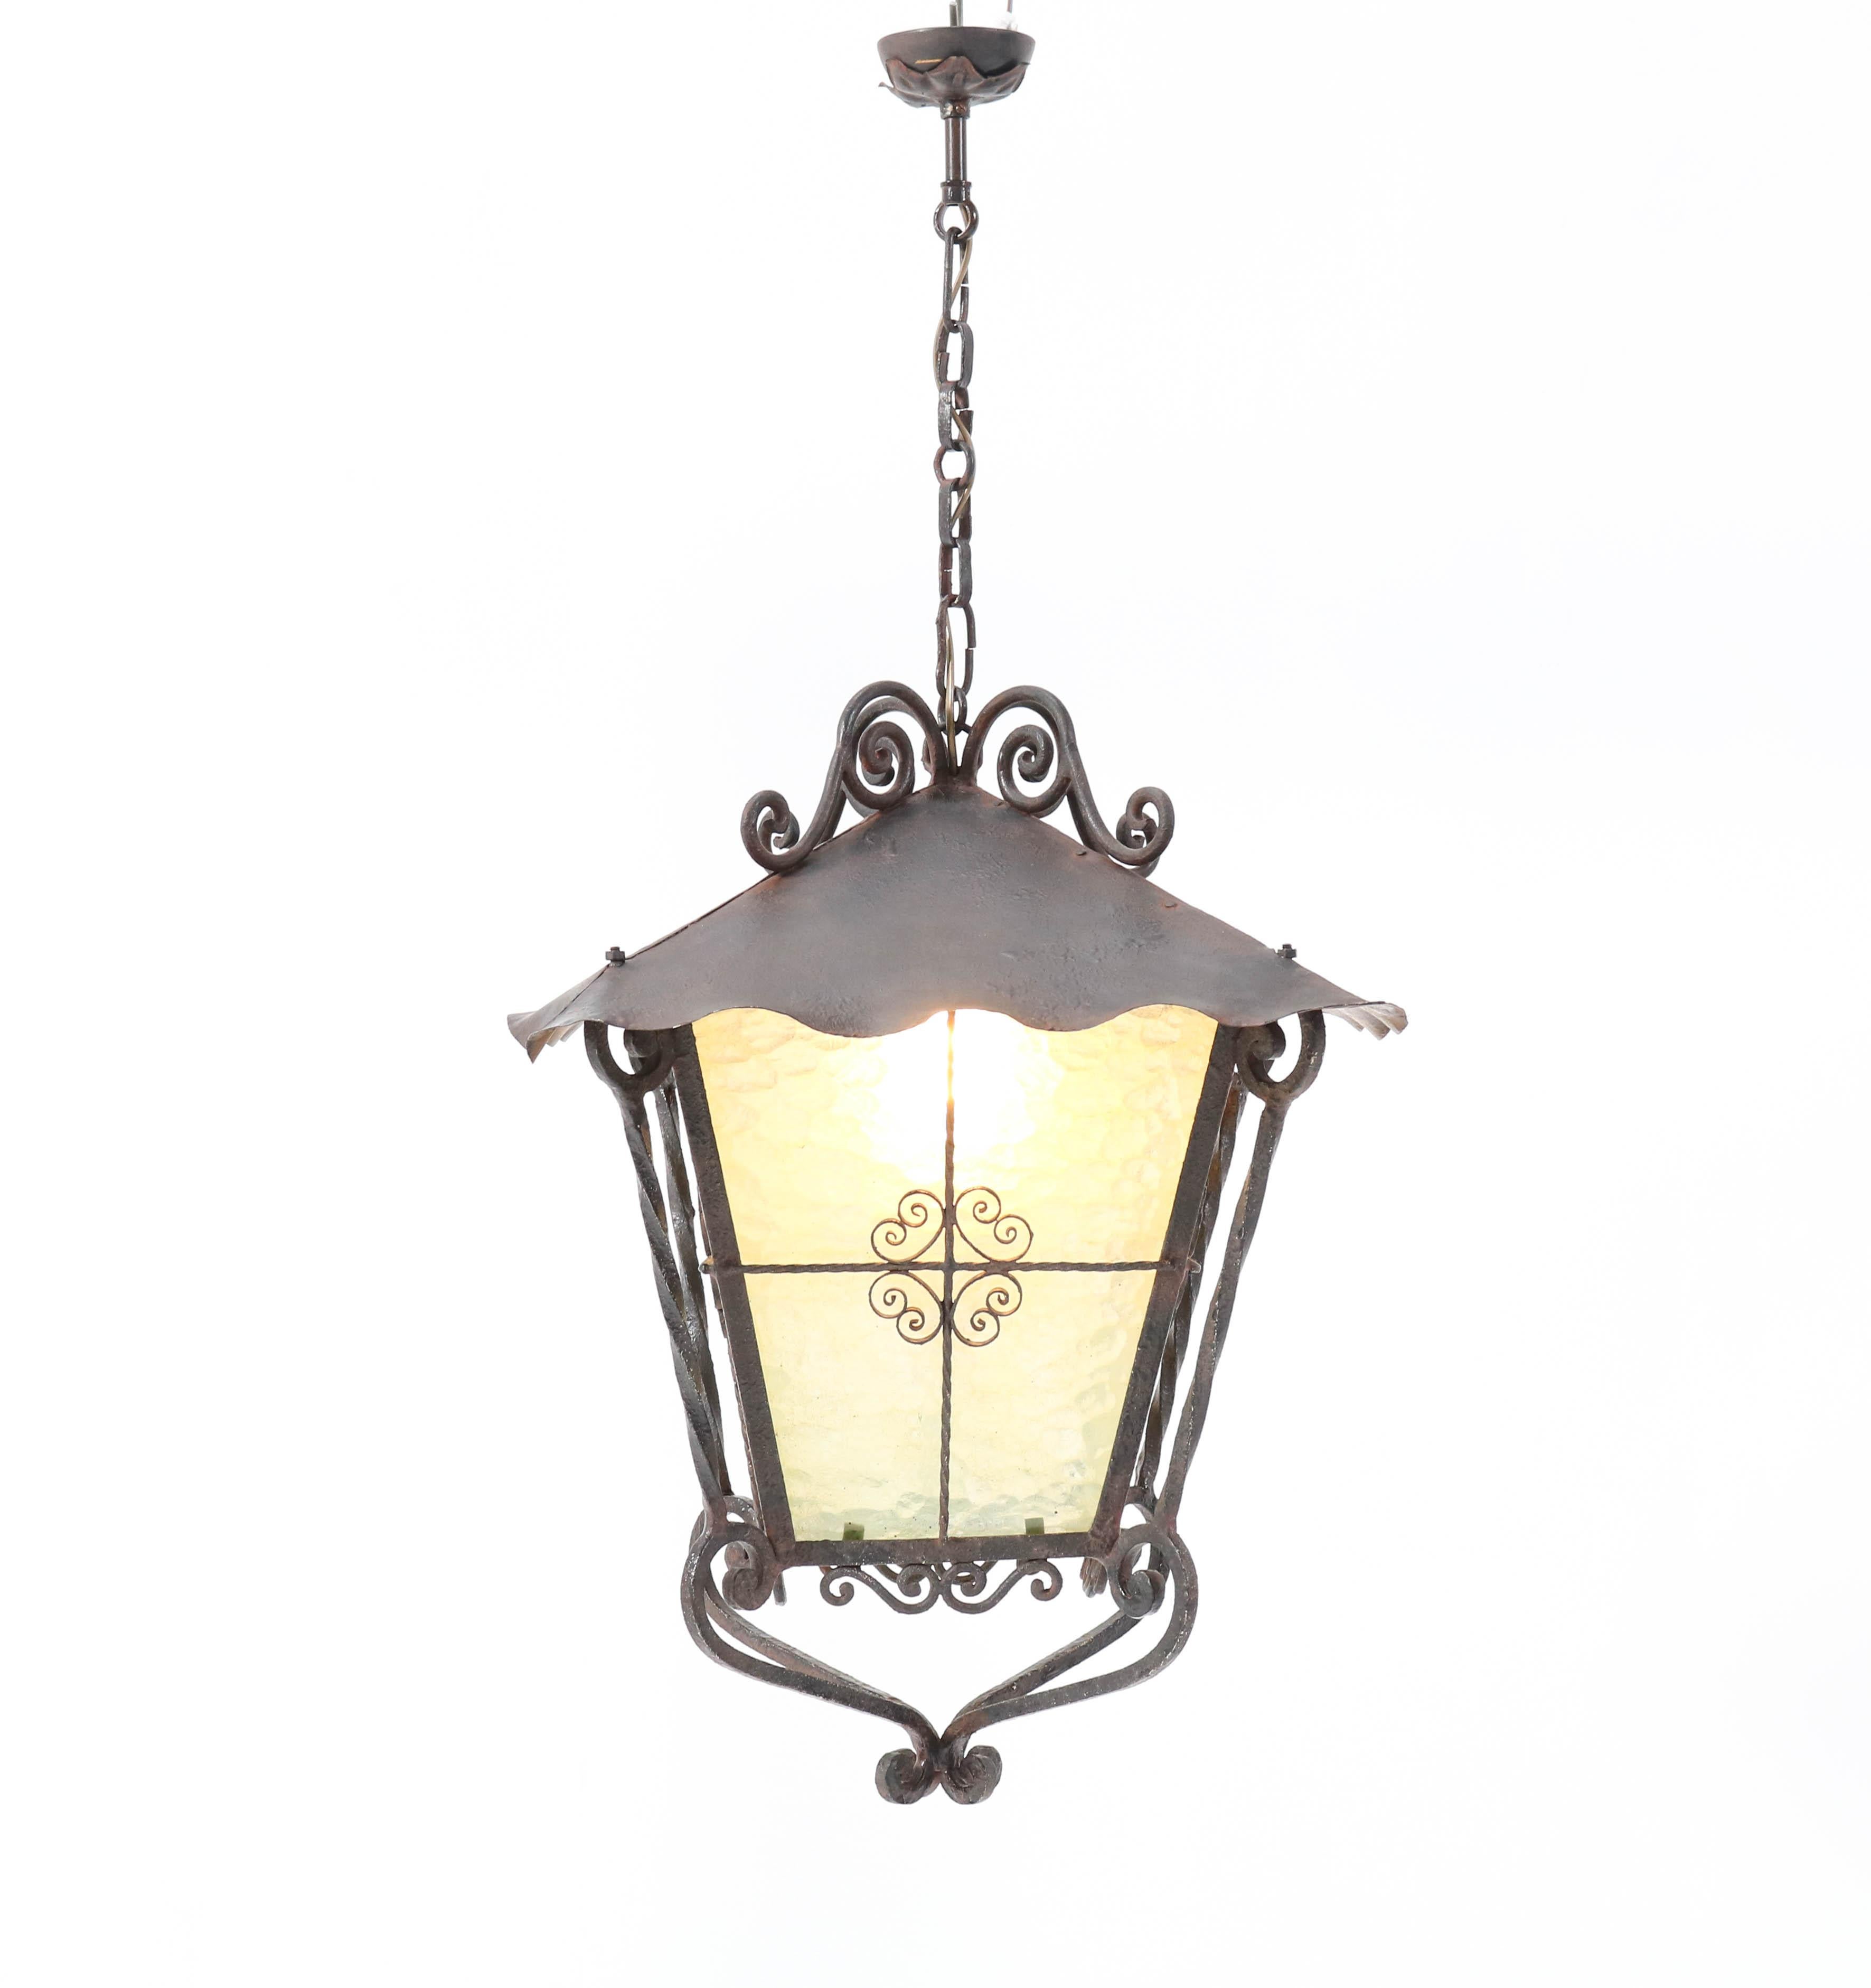 Stunning and large French Provincial lantern.
Striking French design from the 1950s.
Wrought iron frame with original hand blown glass panels.
Rewired with one socket for E-27 light bulb.
In very good condition with minor wear consistent with